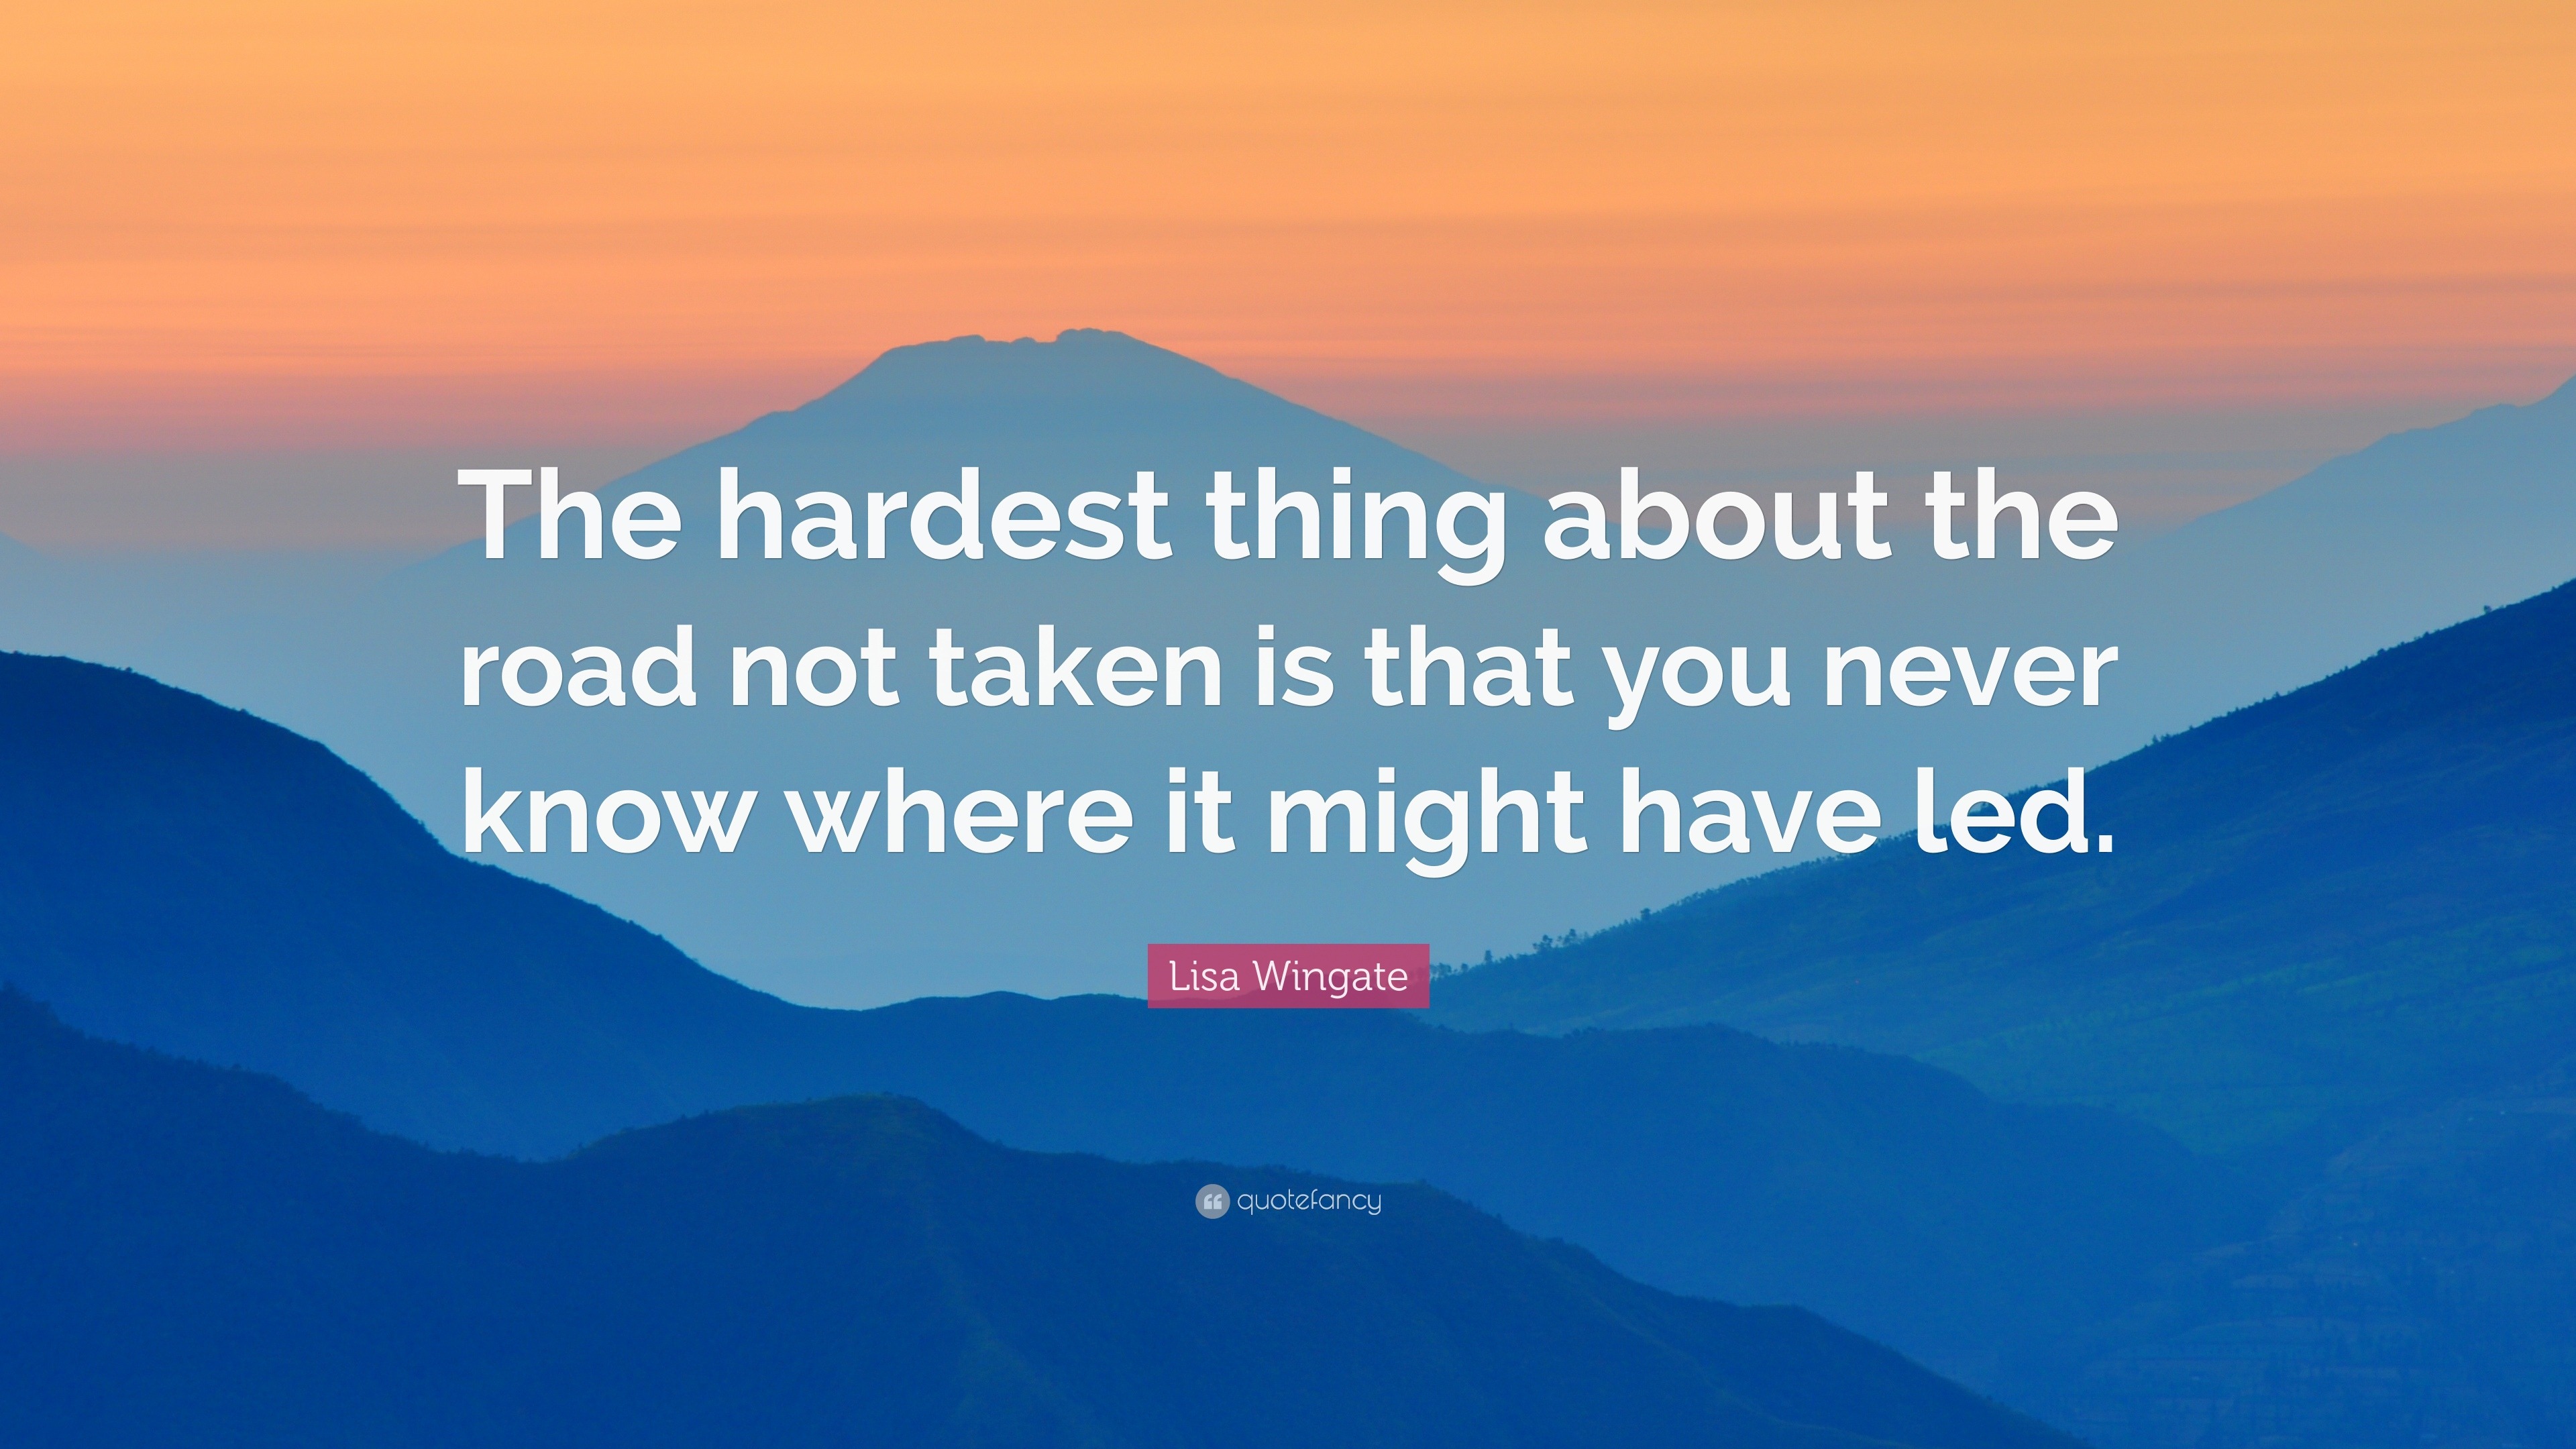 Lisa Wingate Quote: “The hardest thing about the road not ...